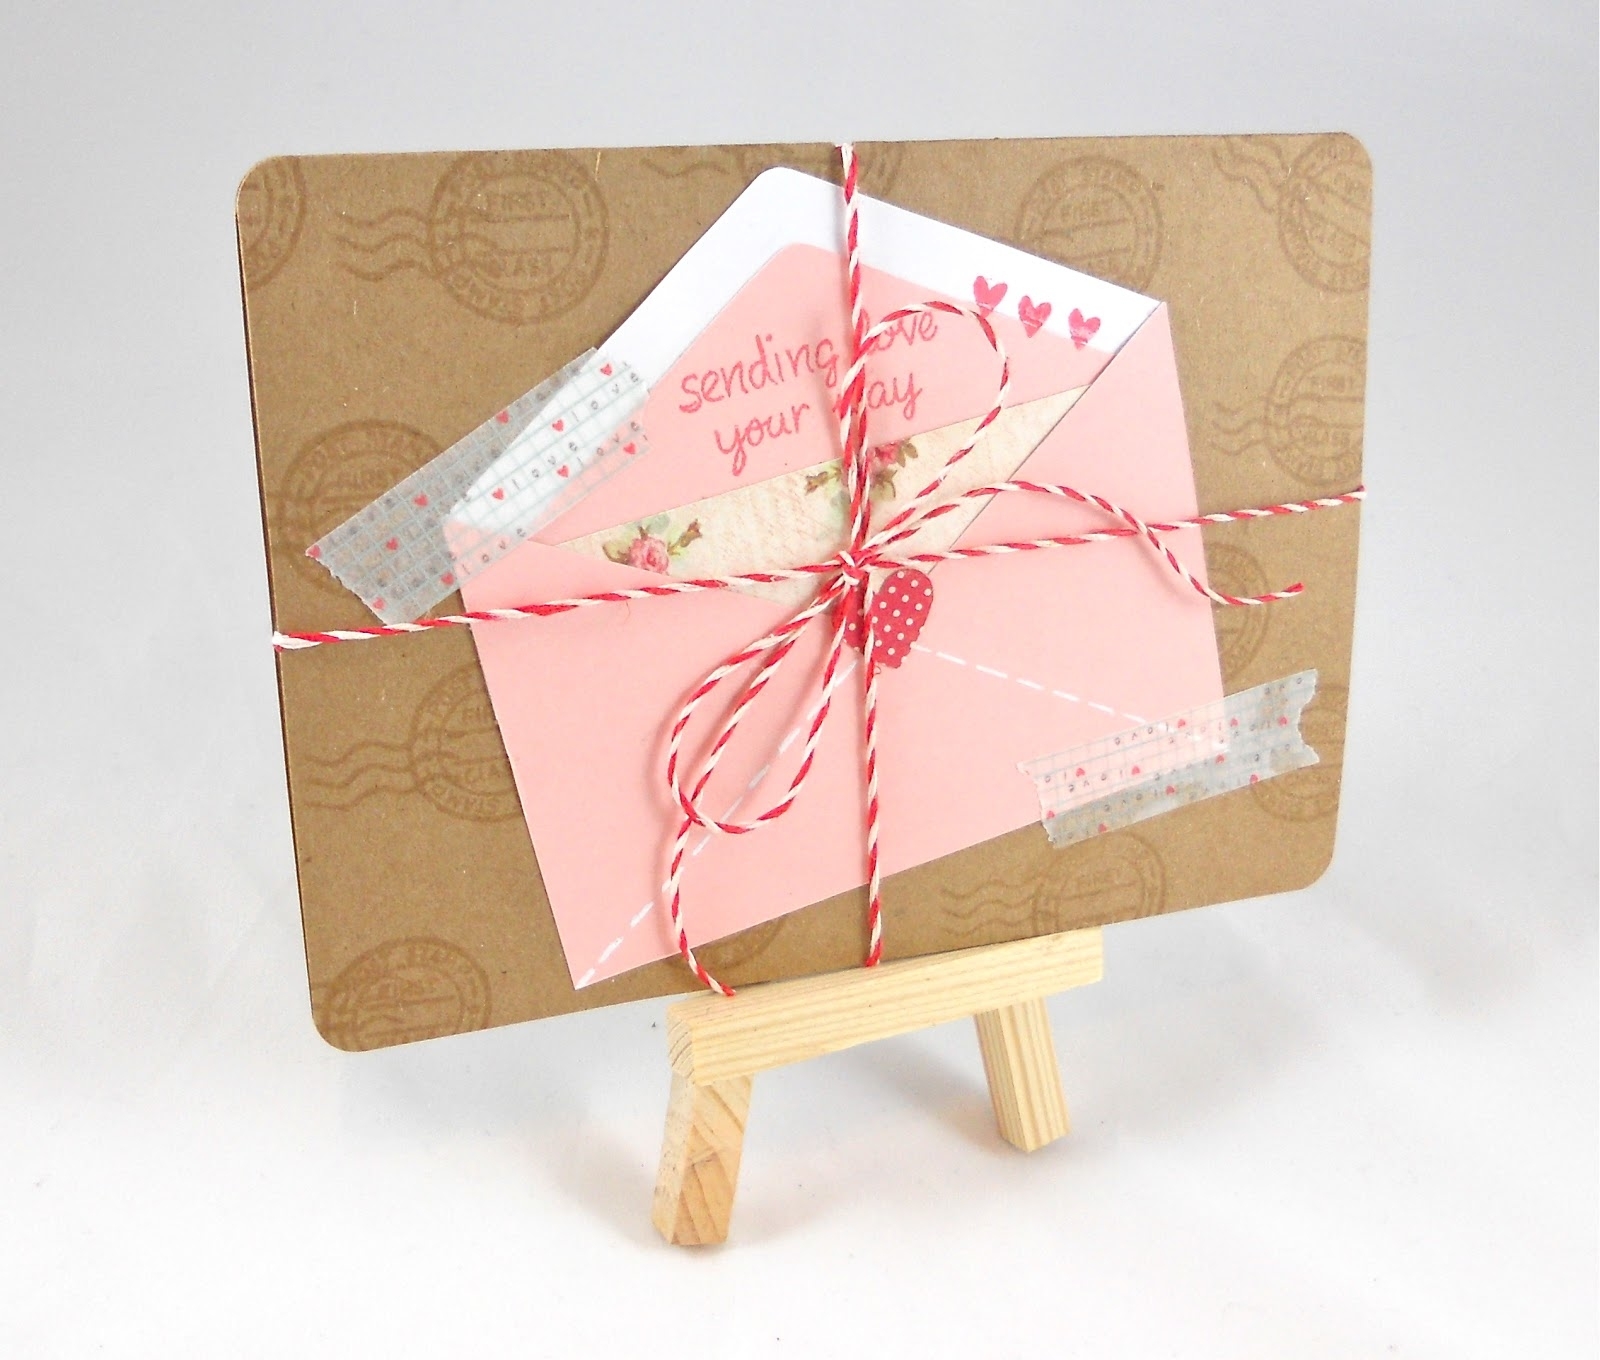 My Chic & Crafty Lil' Heart! ♥: Love Letter! ♥ With Recollections Cards And Envelopes Templates